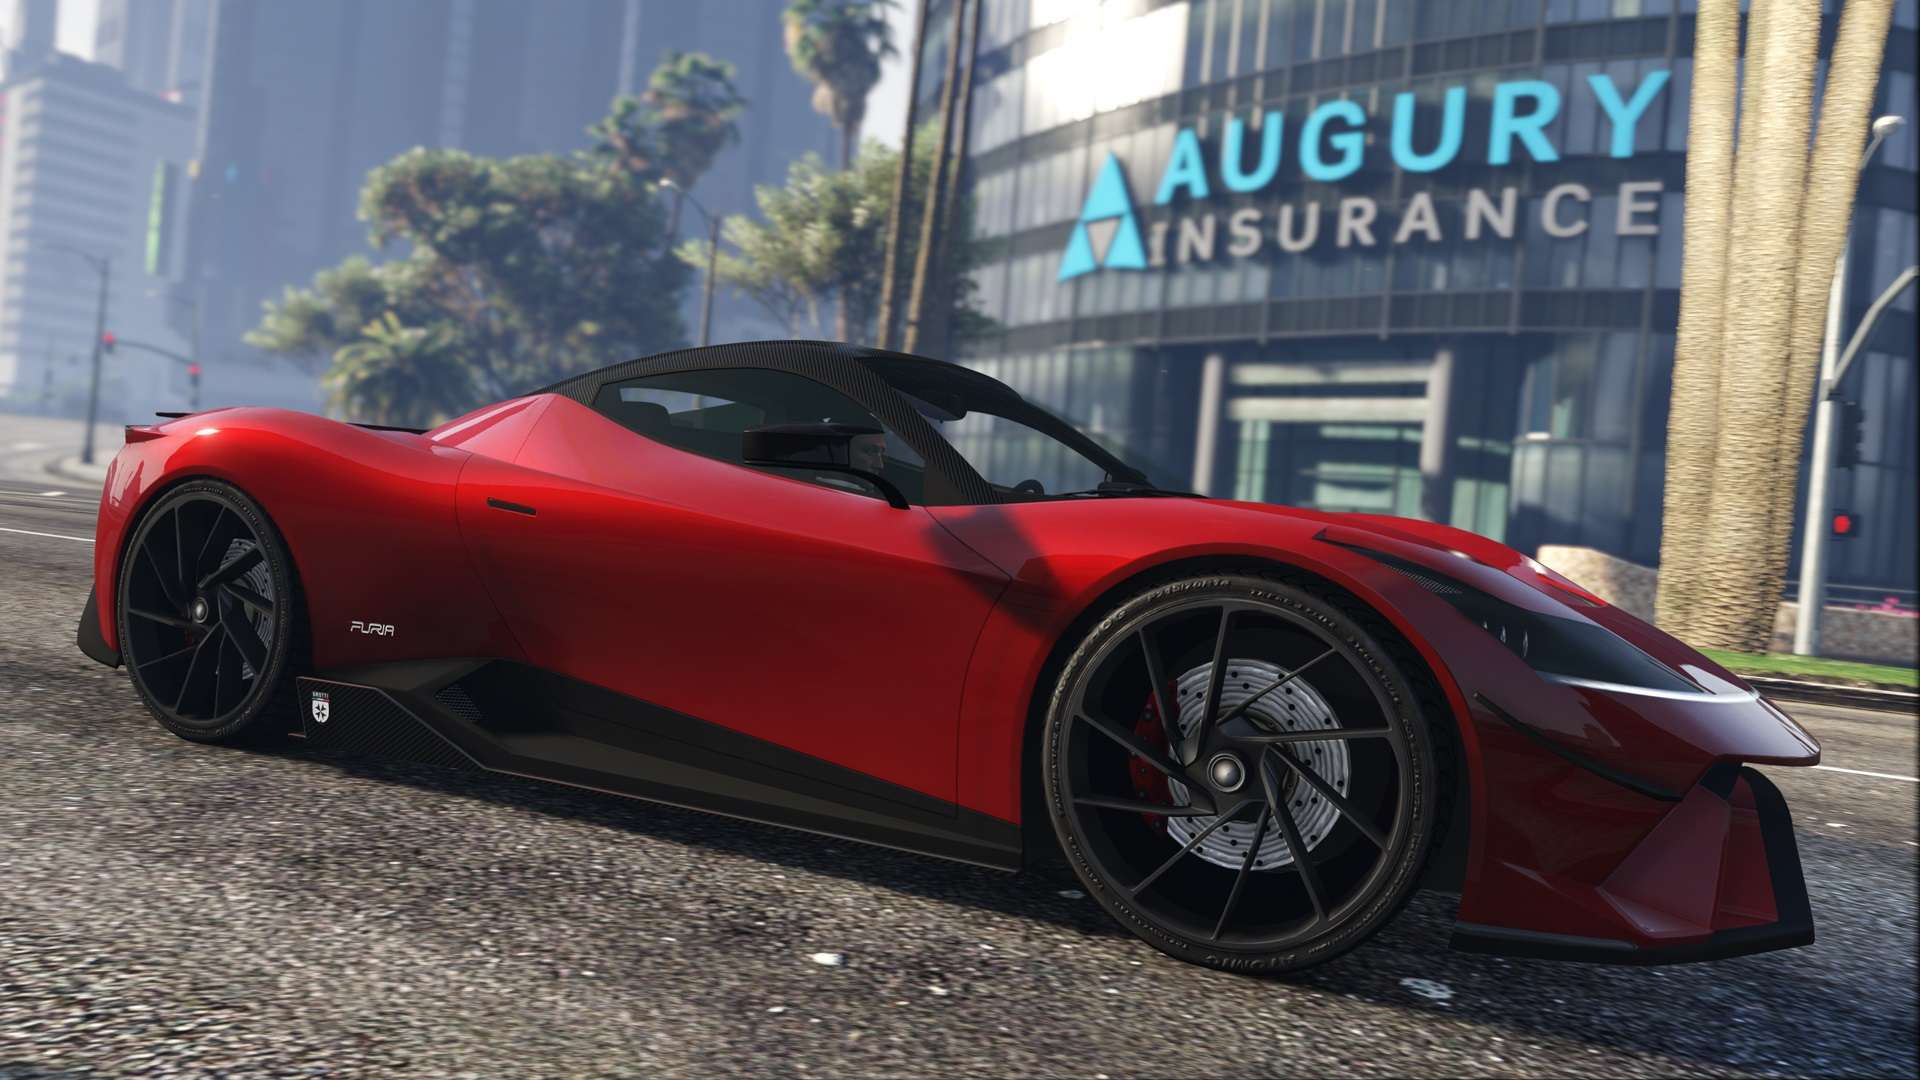 GTA Online Celebrates the Holidays with Festive Gifts, Bonuses, and More